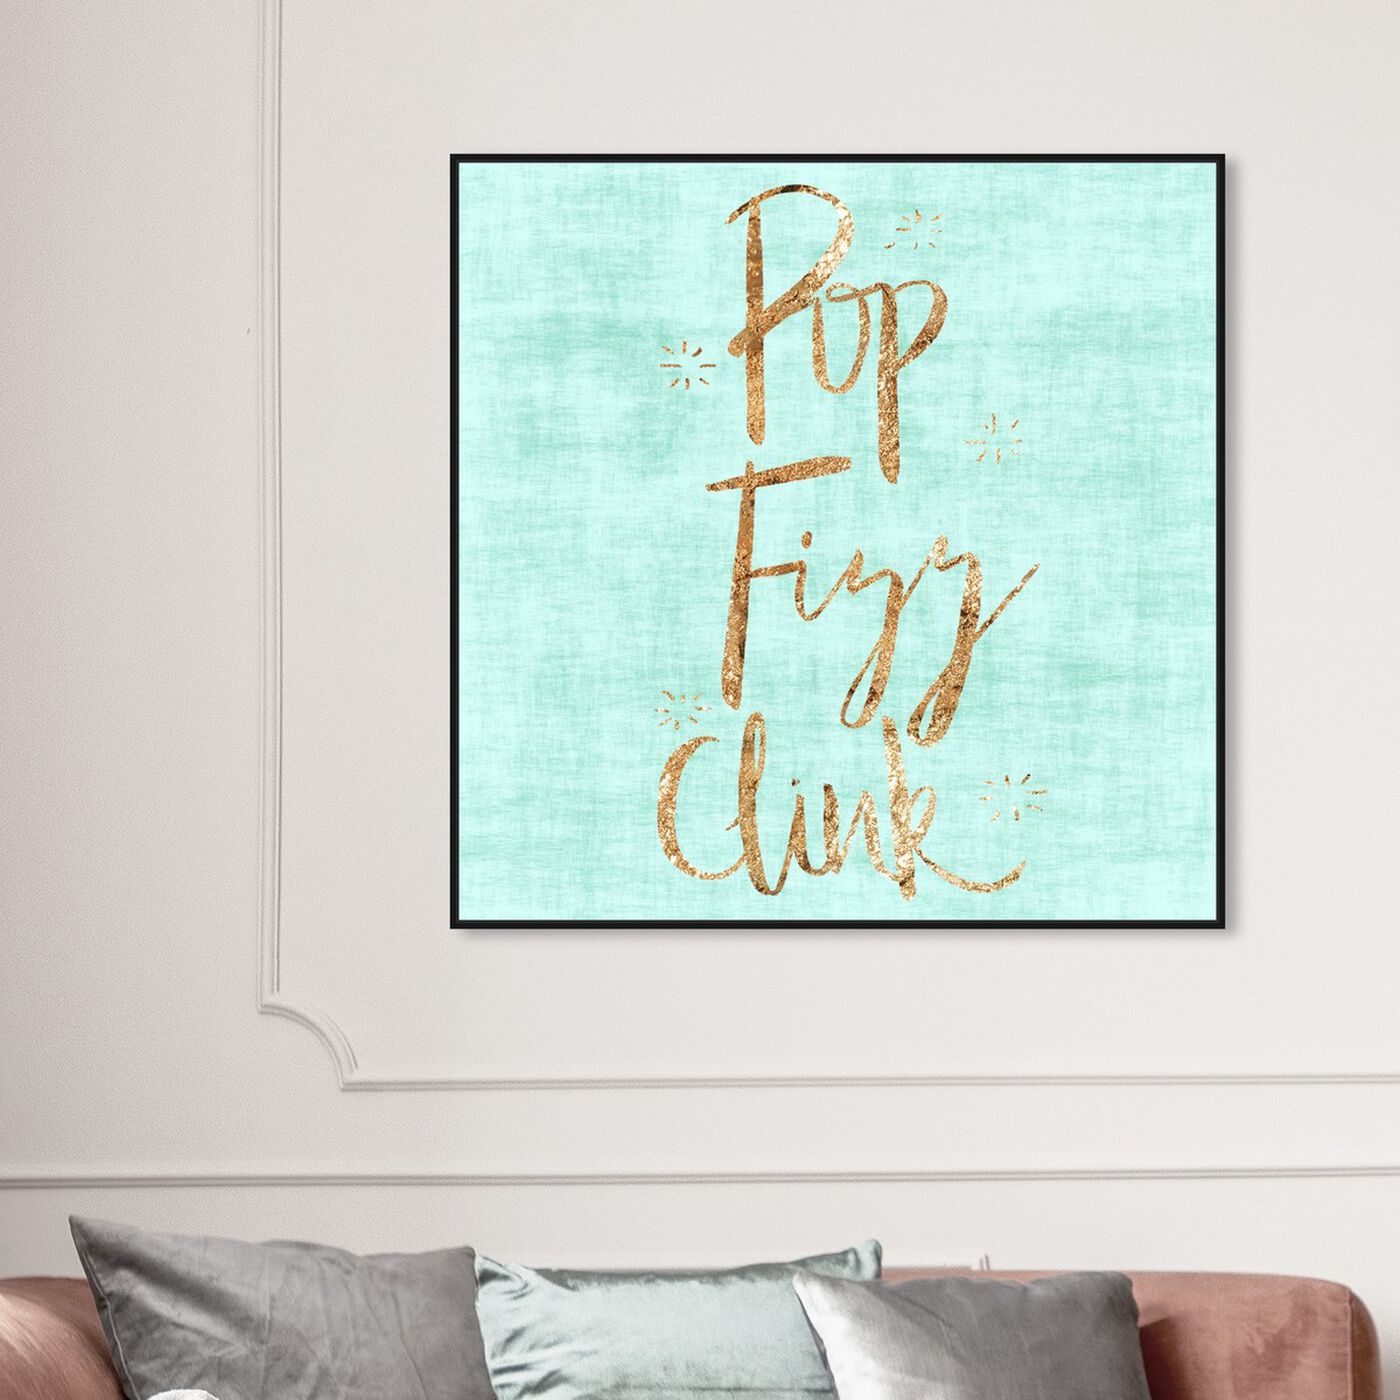 Hanging view of Pop Fizz Clink featuring typography and quotes and funny quotes and sayings art.